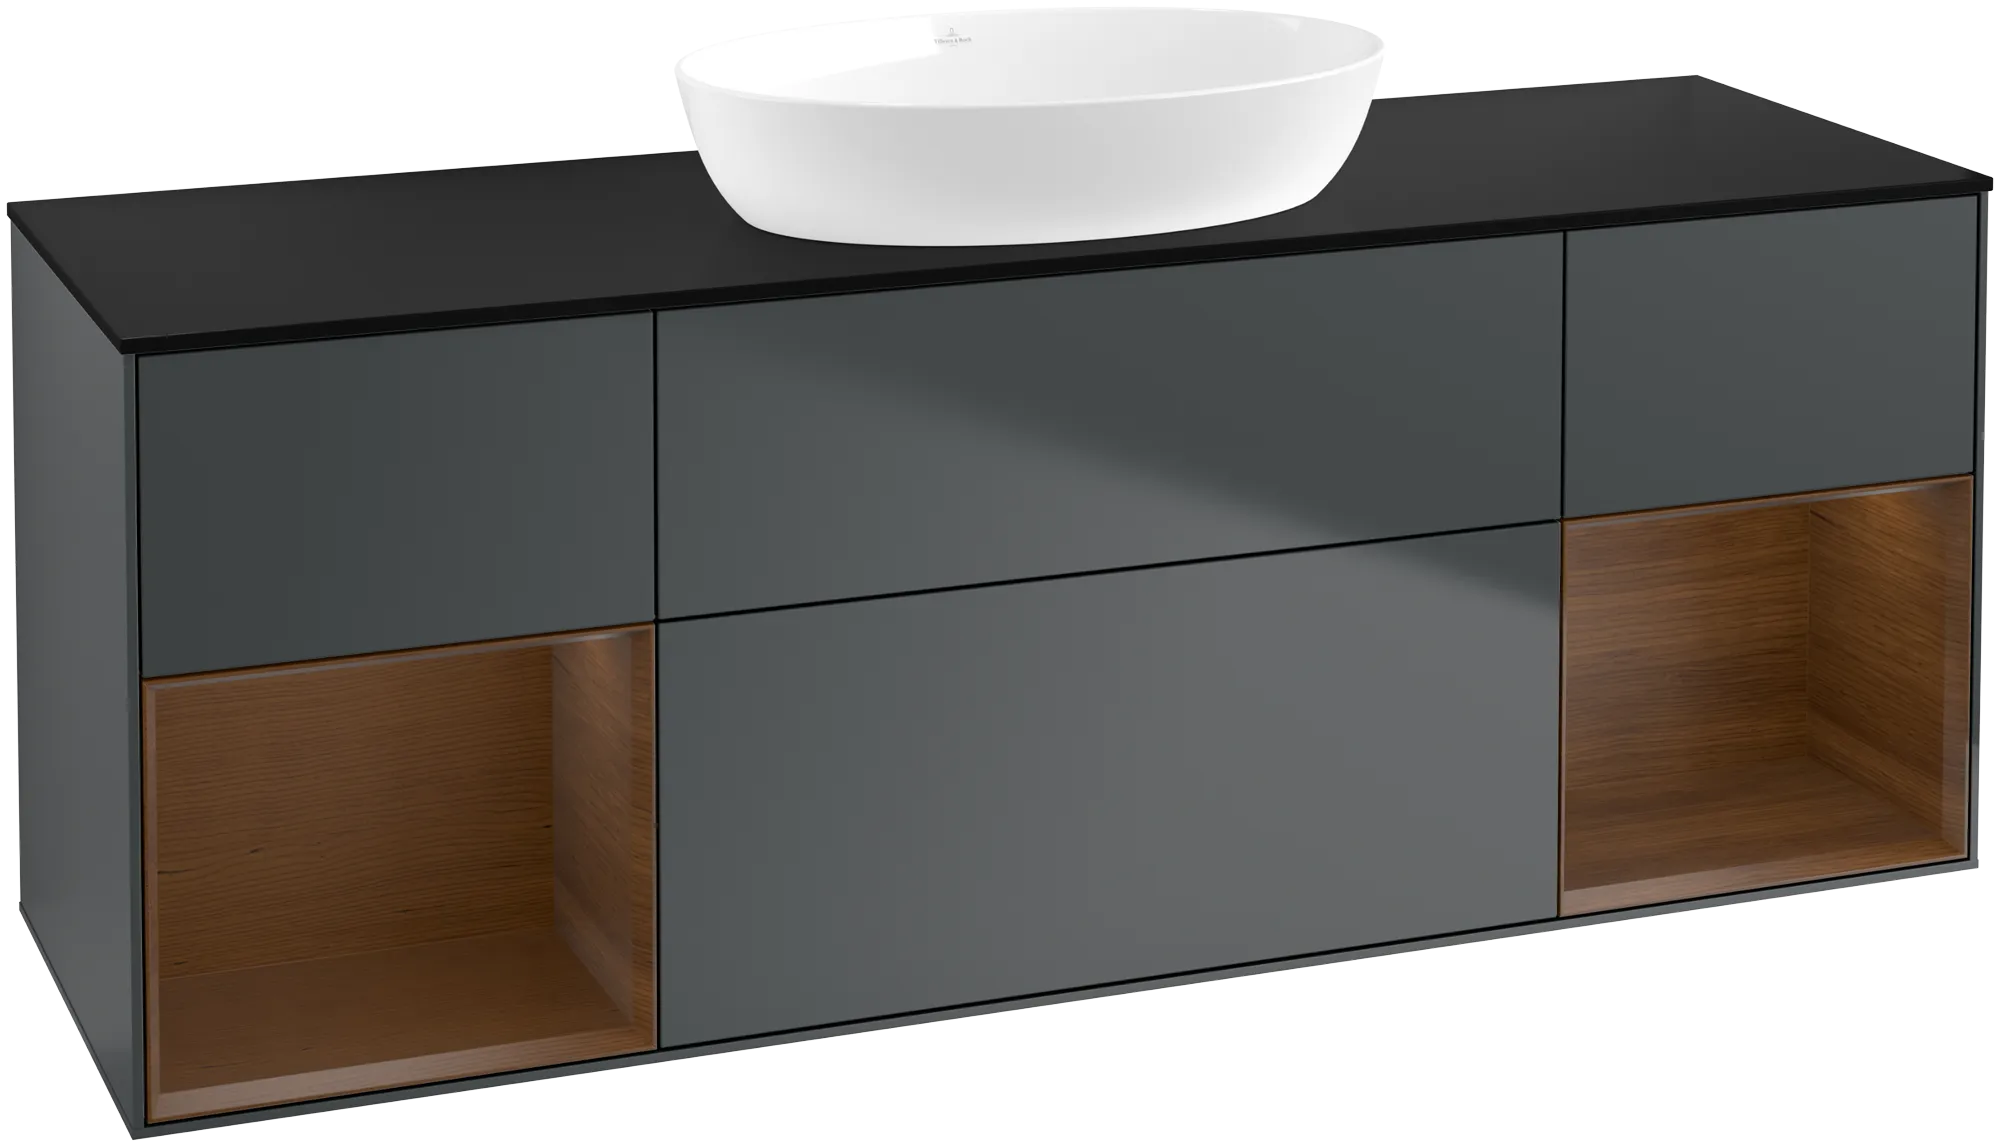 Picture of VILLEROY BOCH Finion Vanity unit, with lighting, 4 pull-out compartments, 1600 x 603 x 501 mm, Midnight Blue Matt Lacquer / Walnut Veneer / Glass Black Matt #GD02GNHG